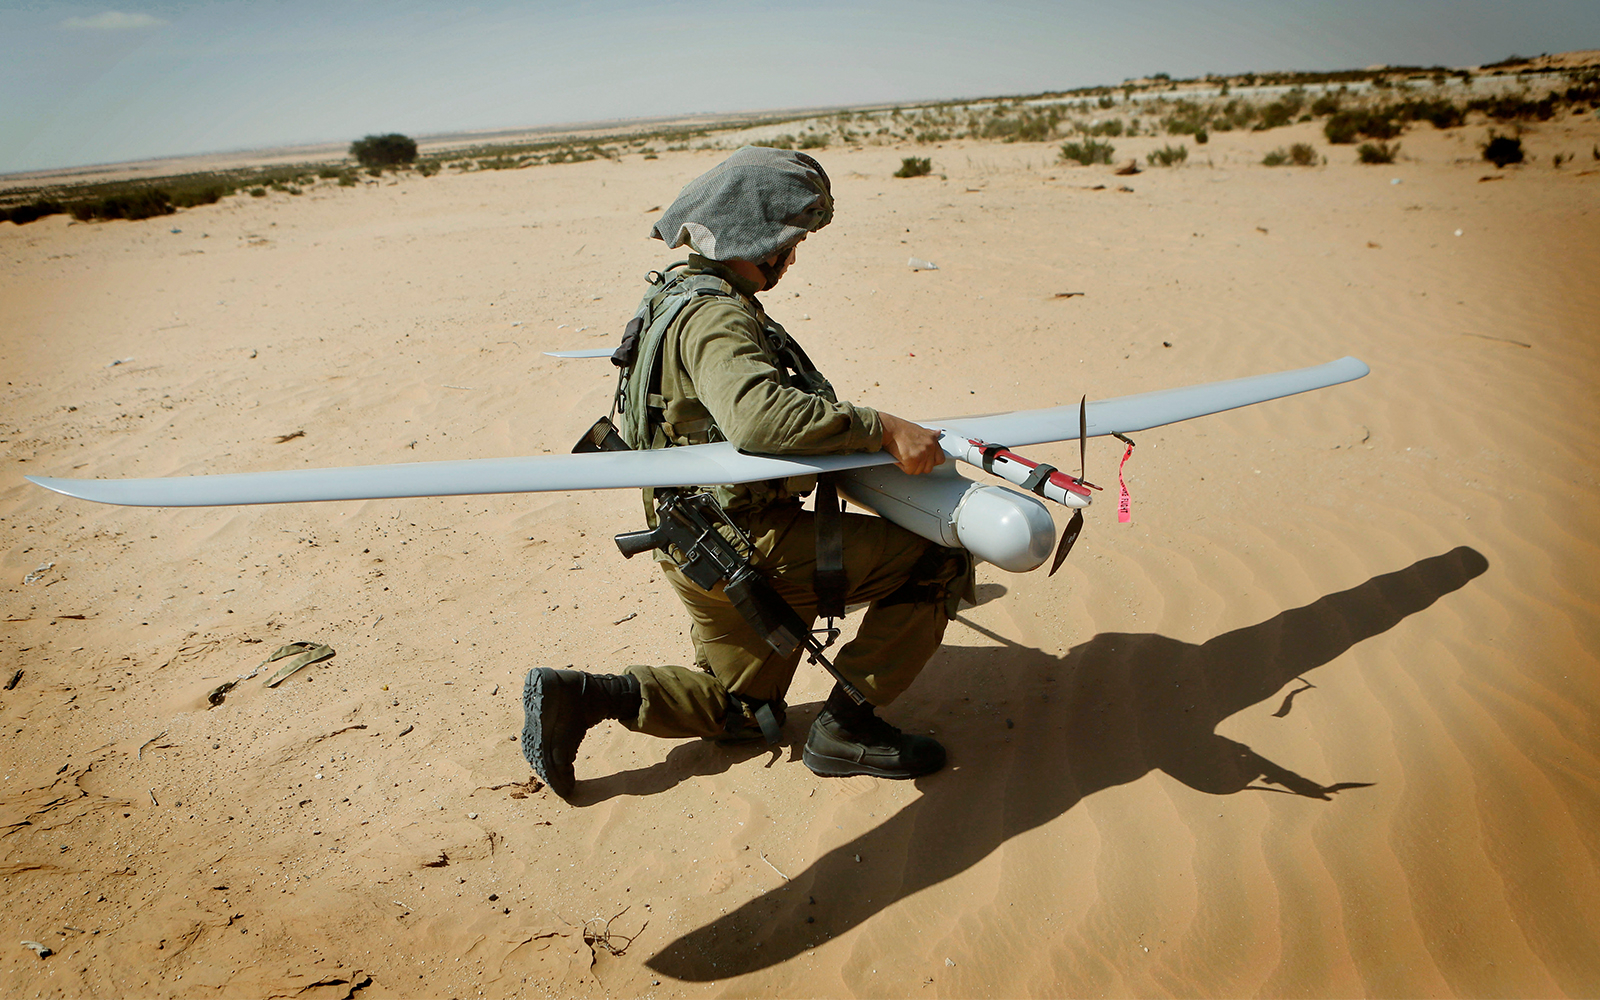 Israel military admits it uses armed drones